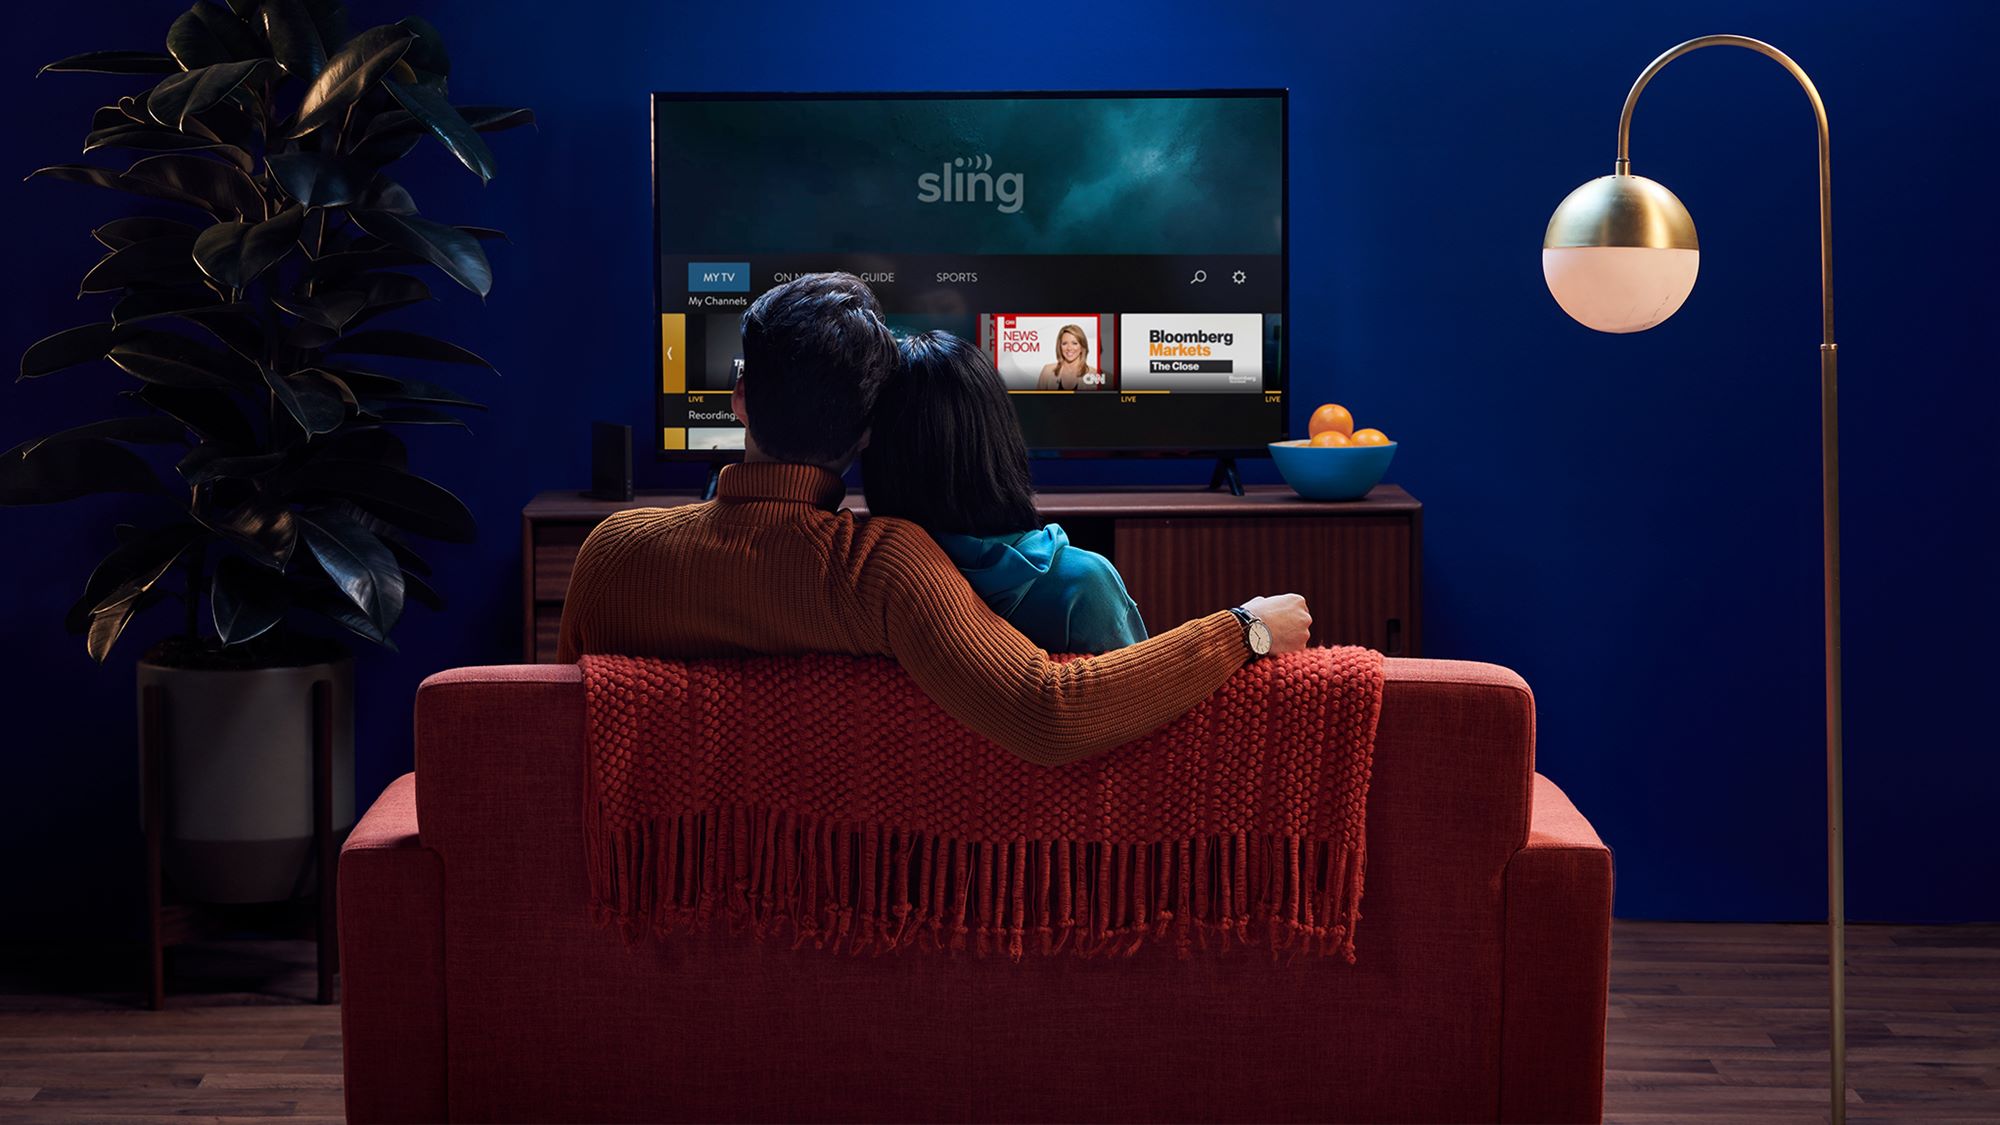 How To Watch Movies On Sling